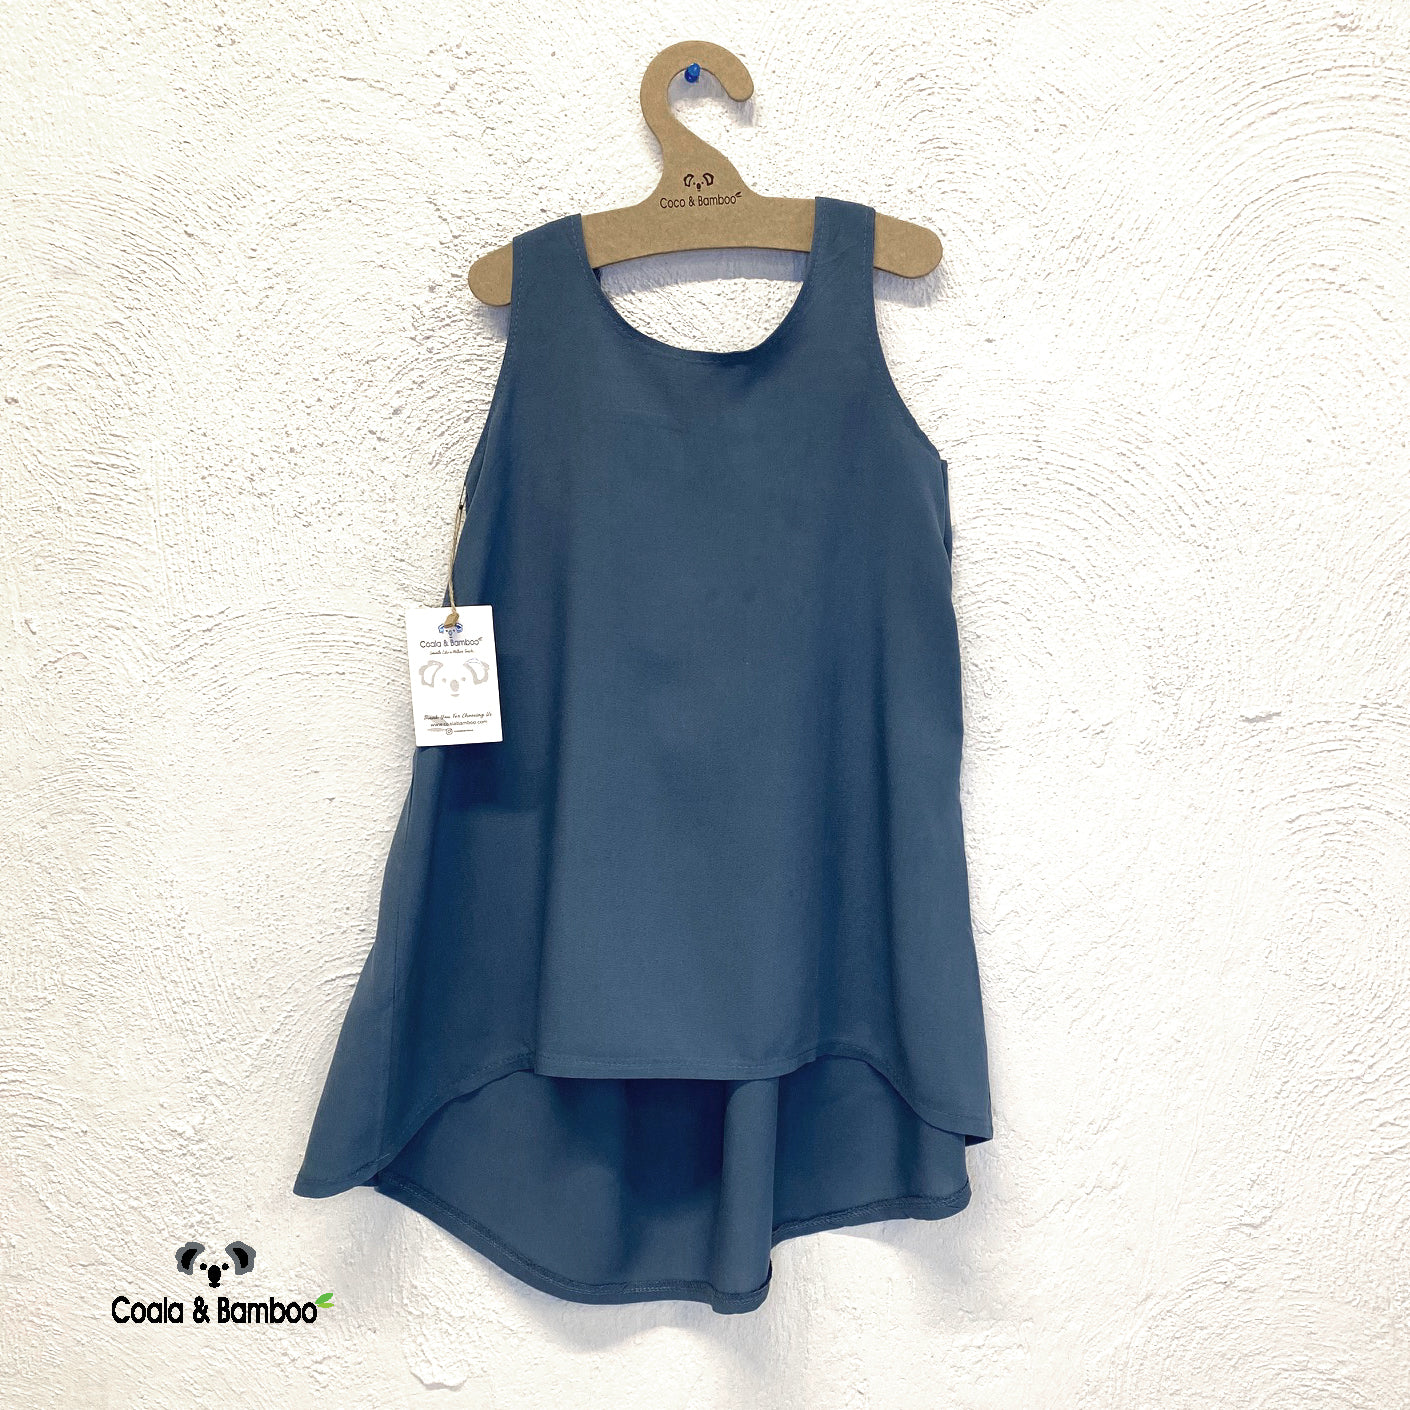 Doha dress for girls Aged 3 Yrs to 9 Yrs- Colored Blue